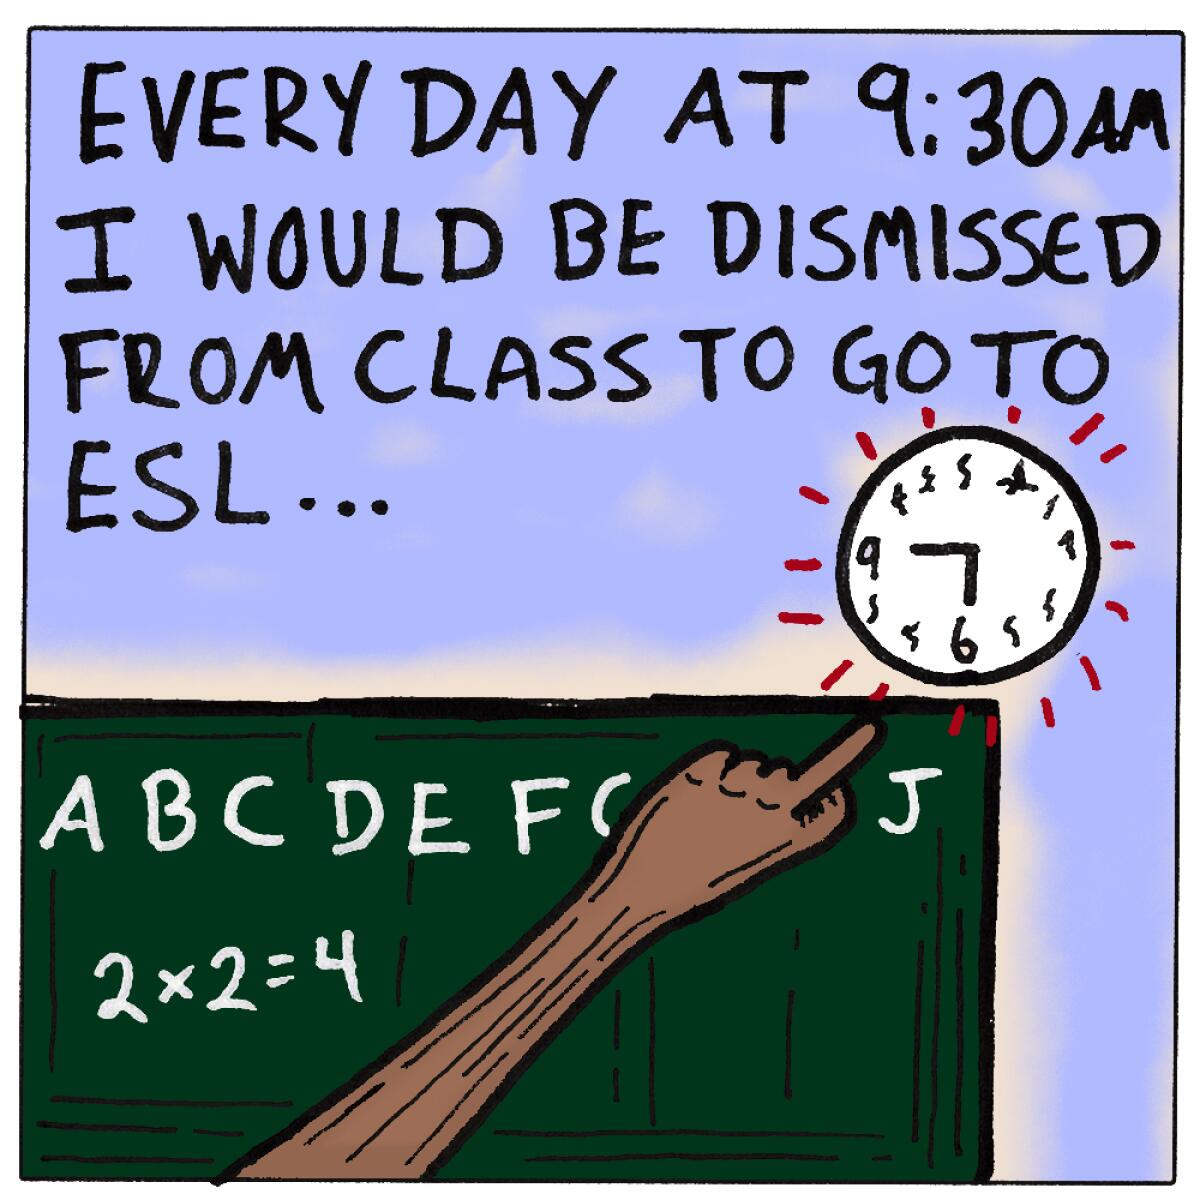 Every day at 9:30AM I would be dismissed from class to go to ESL...